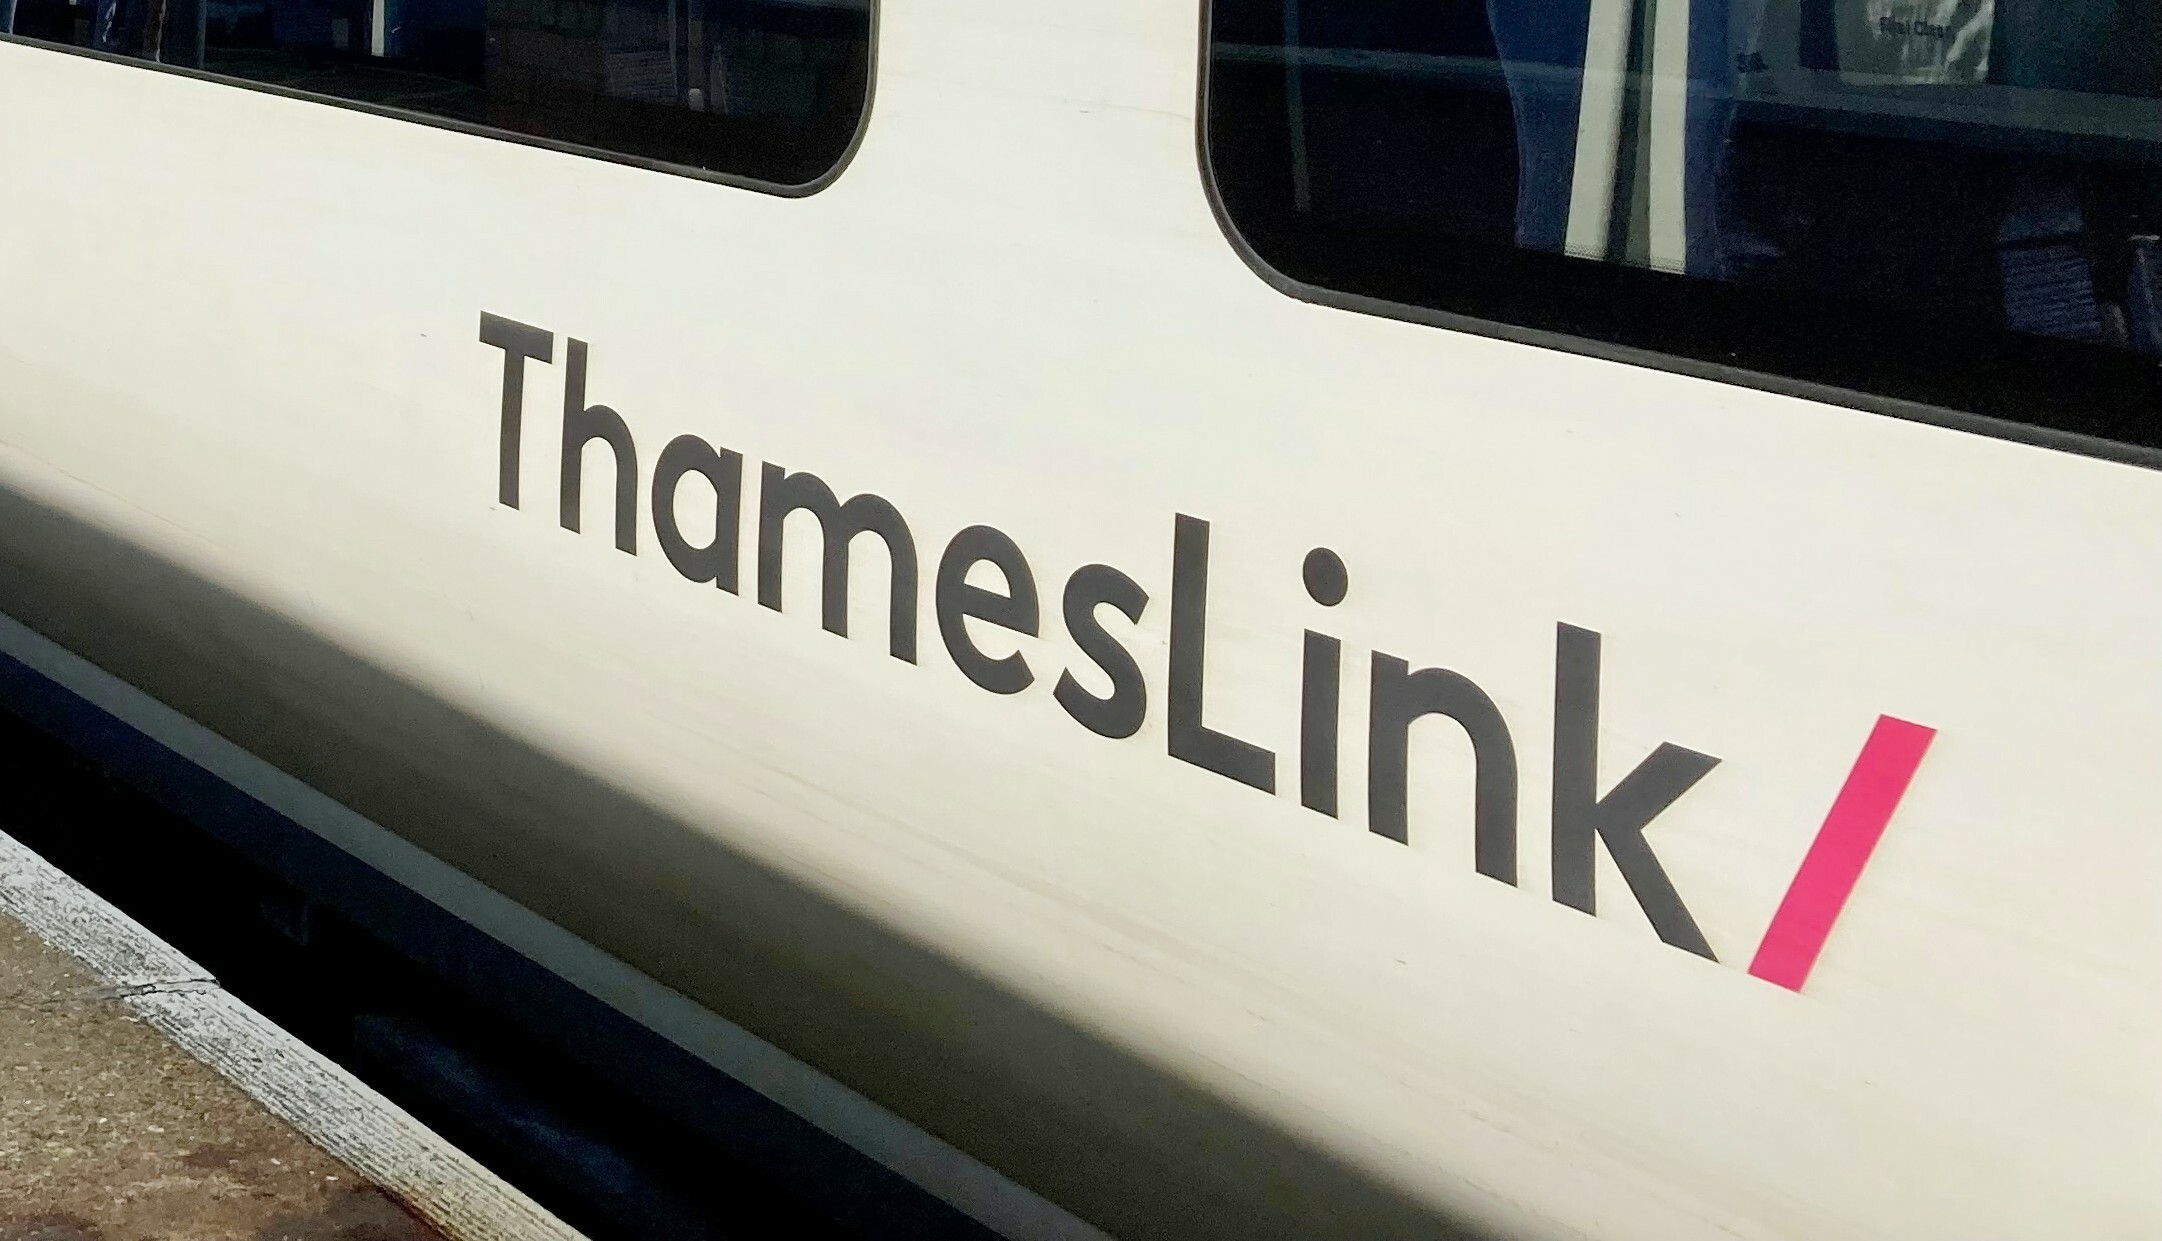 will-thameslink-be-affected-by-train-strikes-this-week?